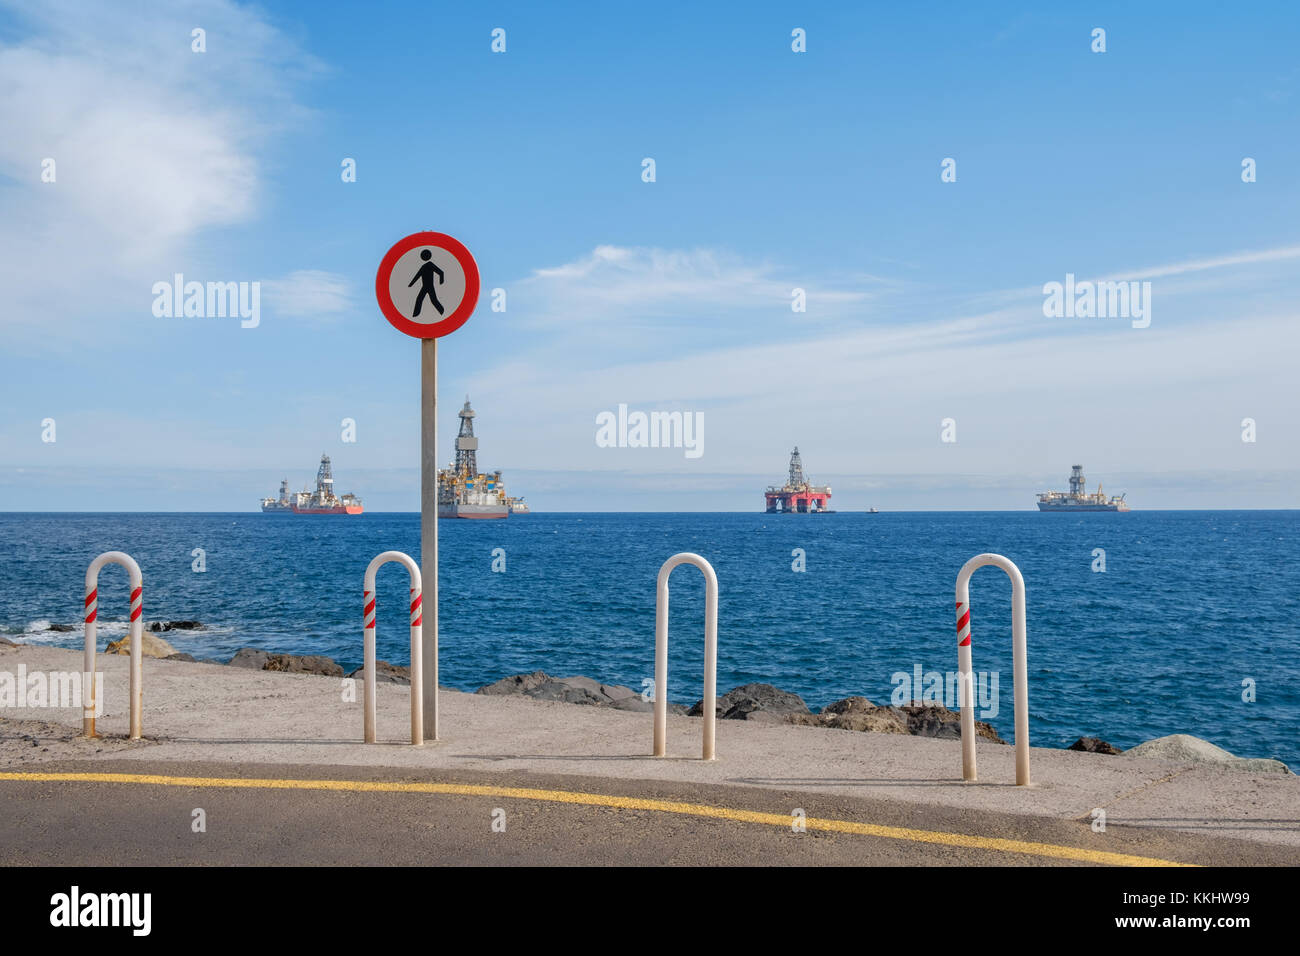 no trespass sign at end of road with ocean background, offshore drilling ships and platform on horizon Stock Photo